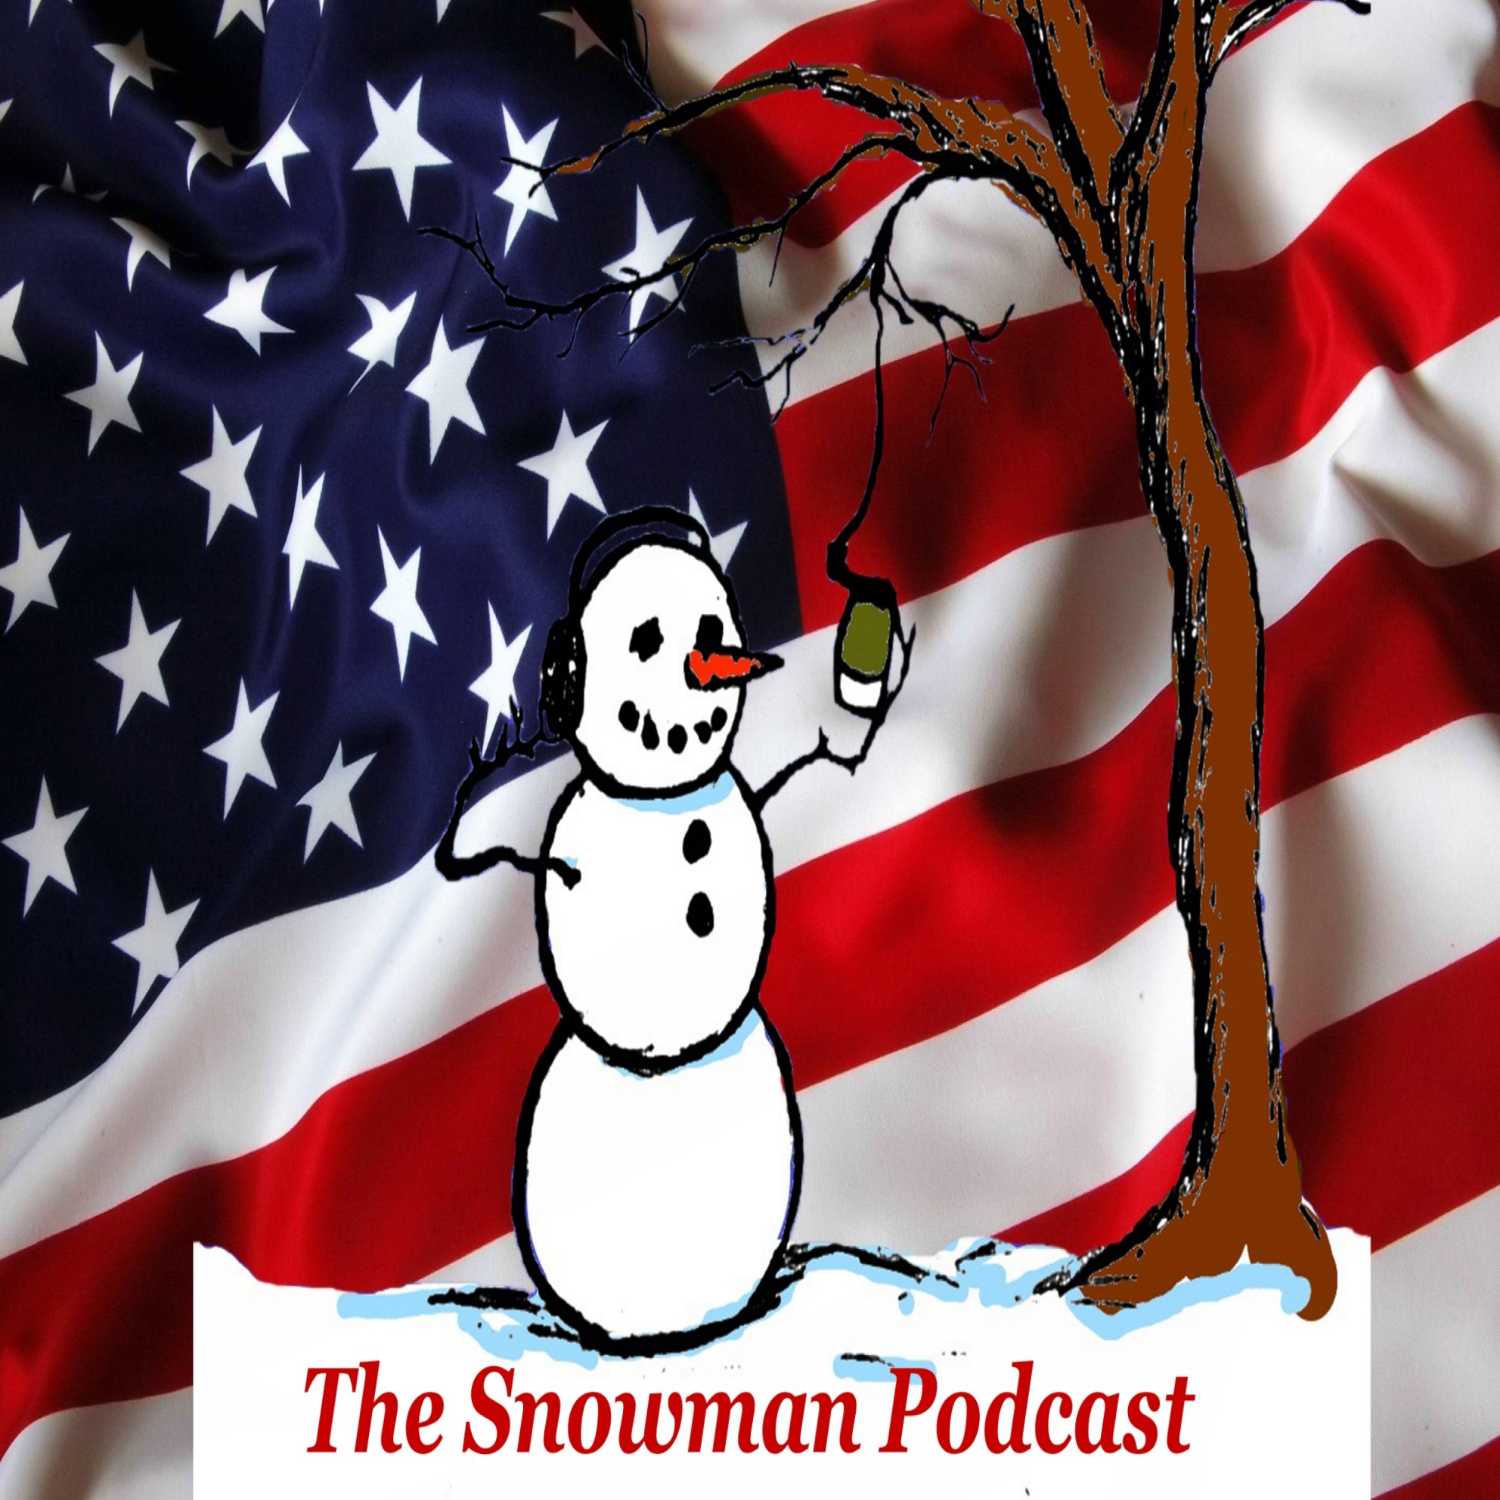 The Snowman Podcast